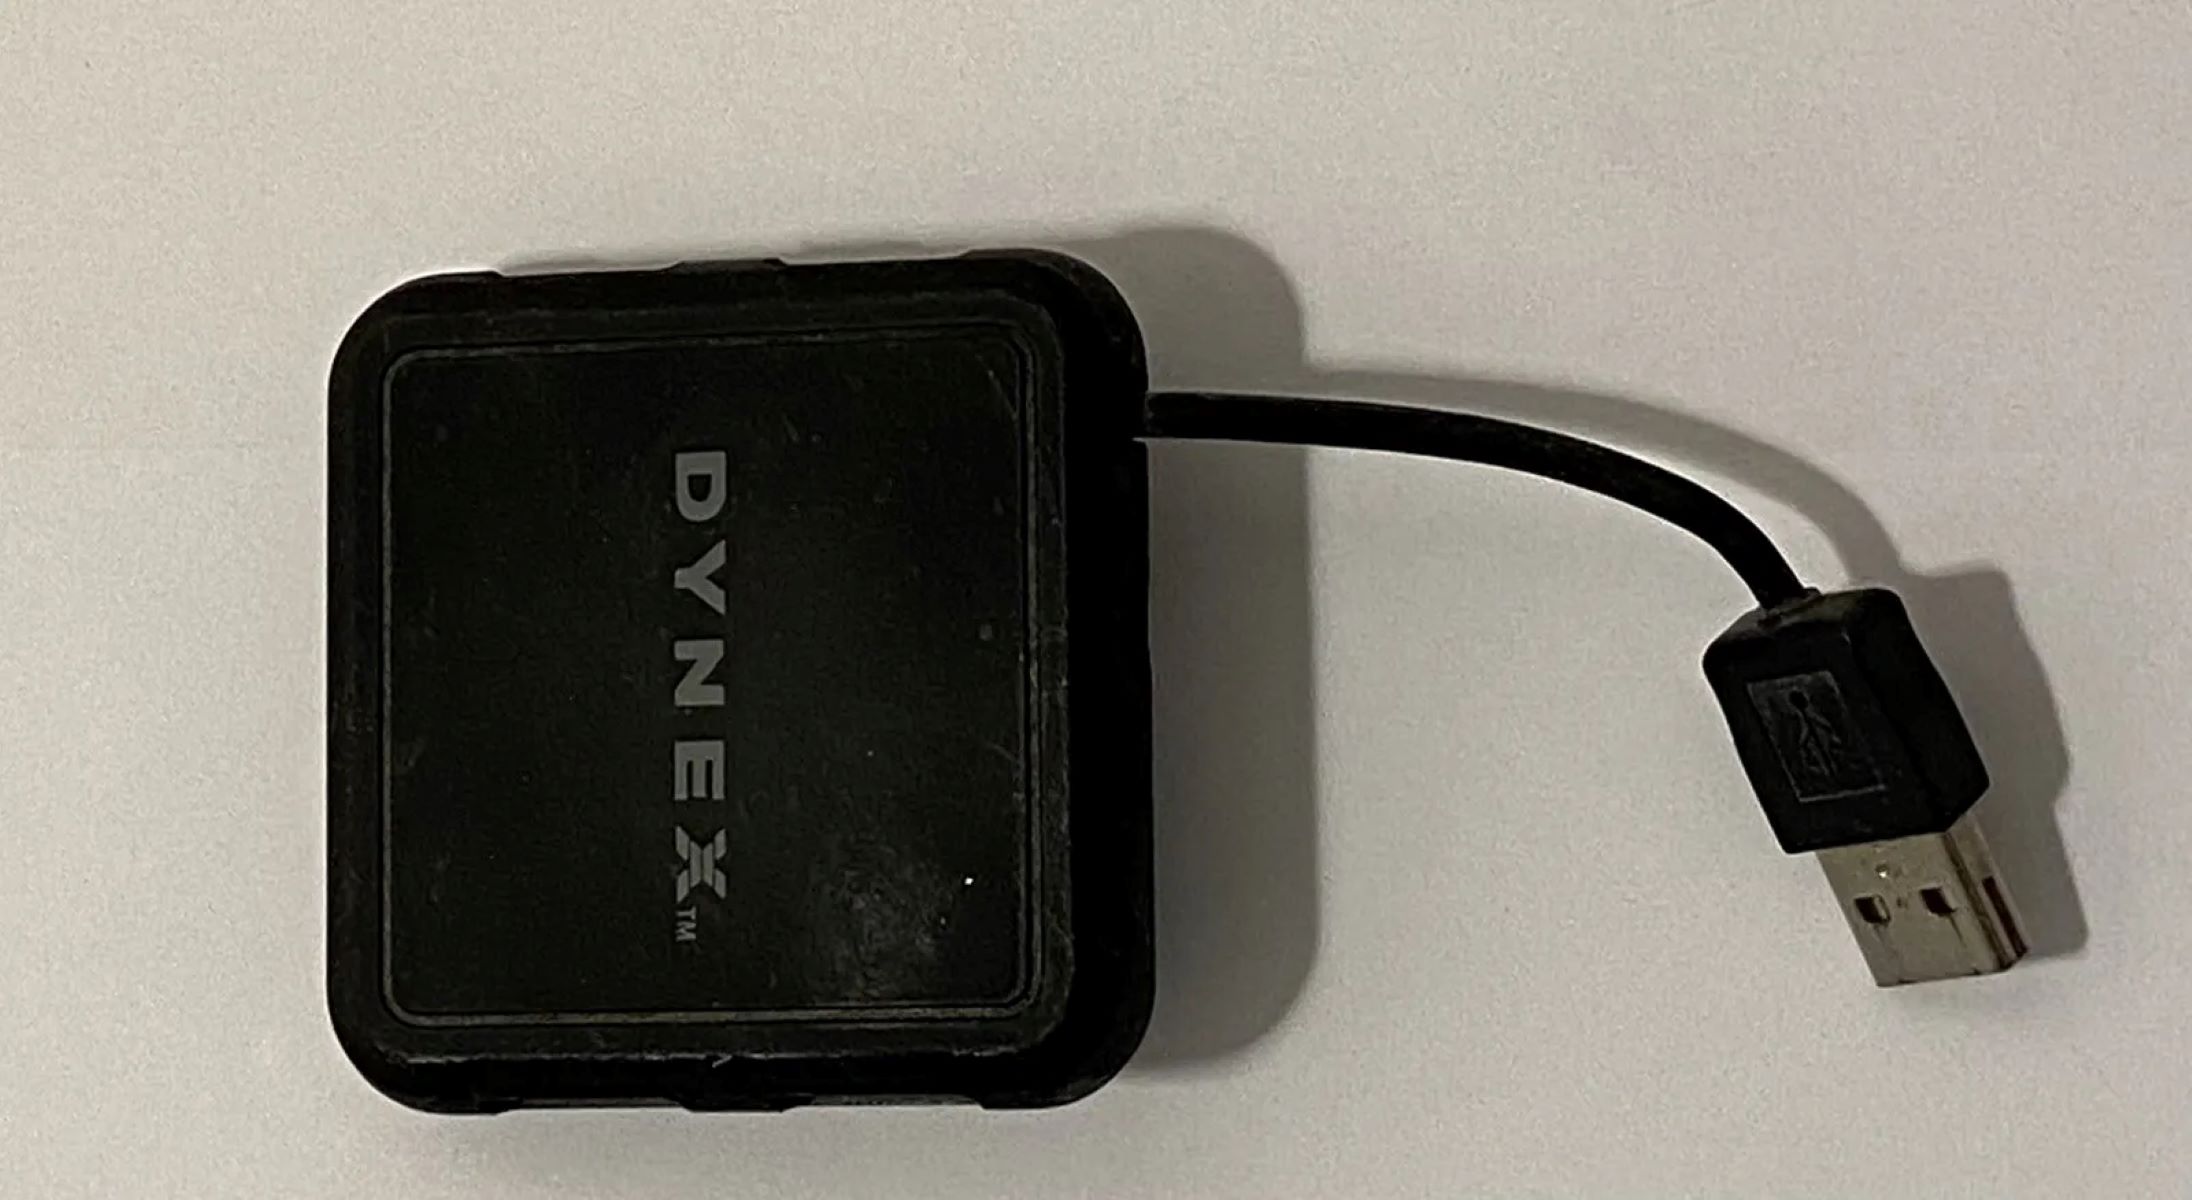 How To Get USB Hub To Work On Dynex To